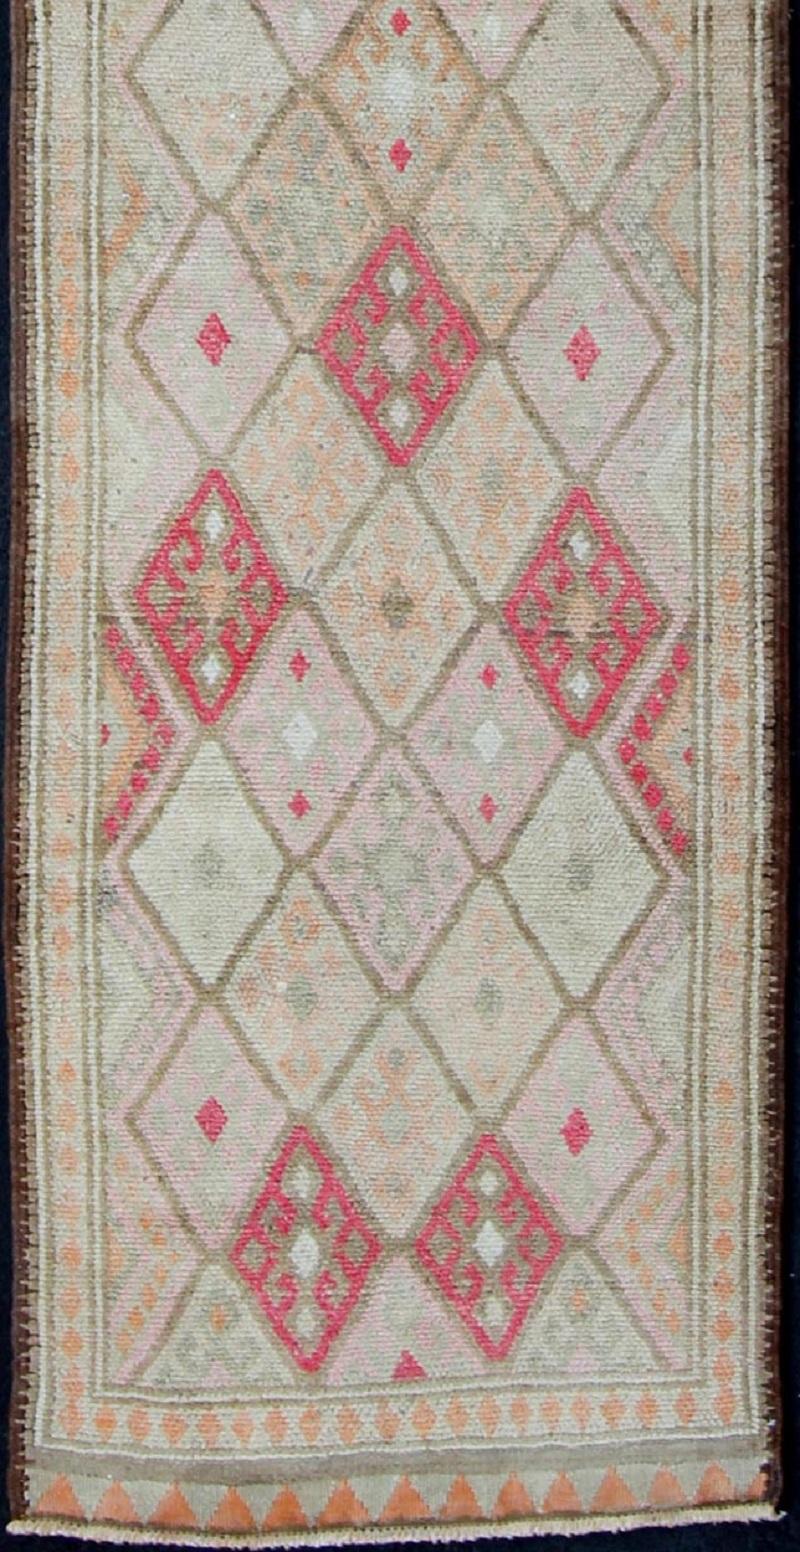 Vintage runner from Turkey with all-over design of geometric diamonds with Kurdish in pink, ivory, taupe, green/gray and soft orange tones, rug en-165324, country of origin / type: Turkey / Oushak, circa 1950.

This beautiful vintage Turkish